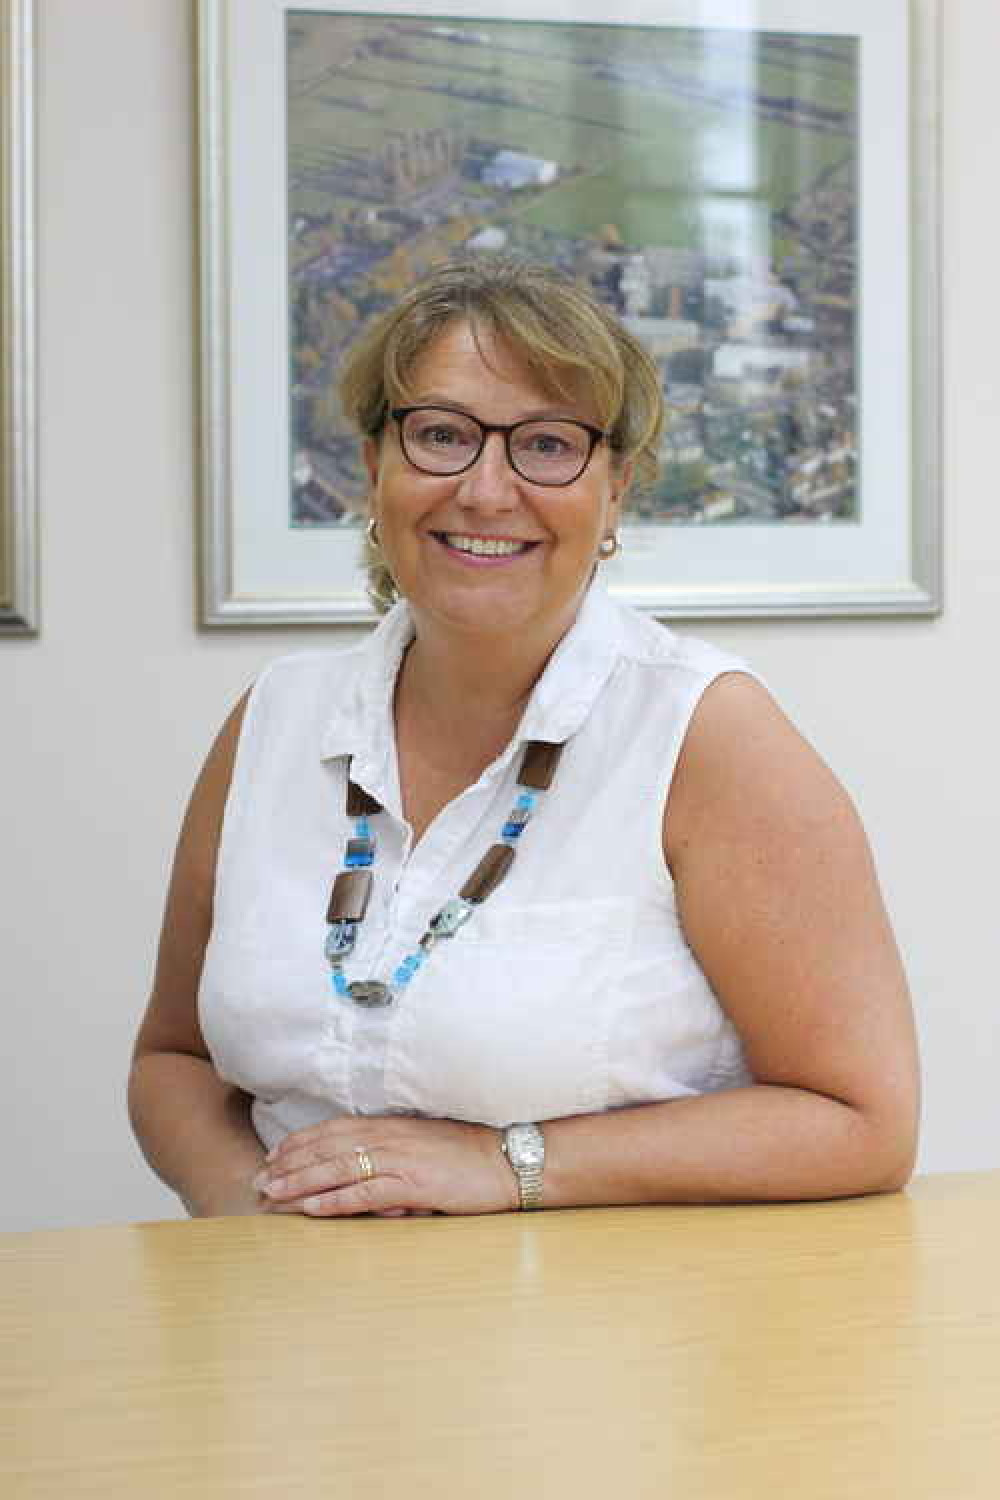 Principal and CEO of Strode College, Katy Quinn